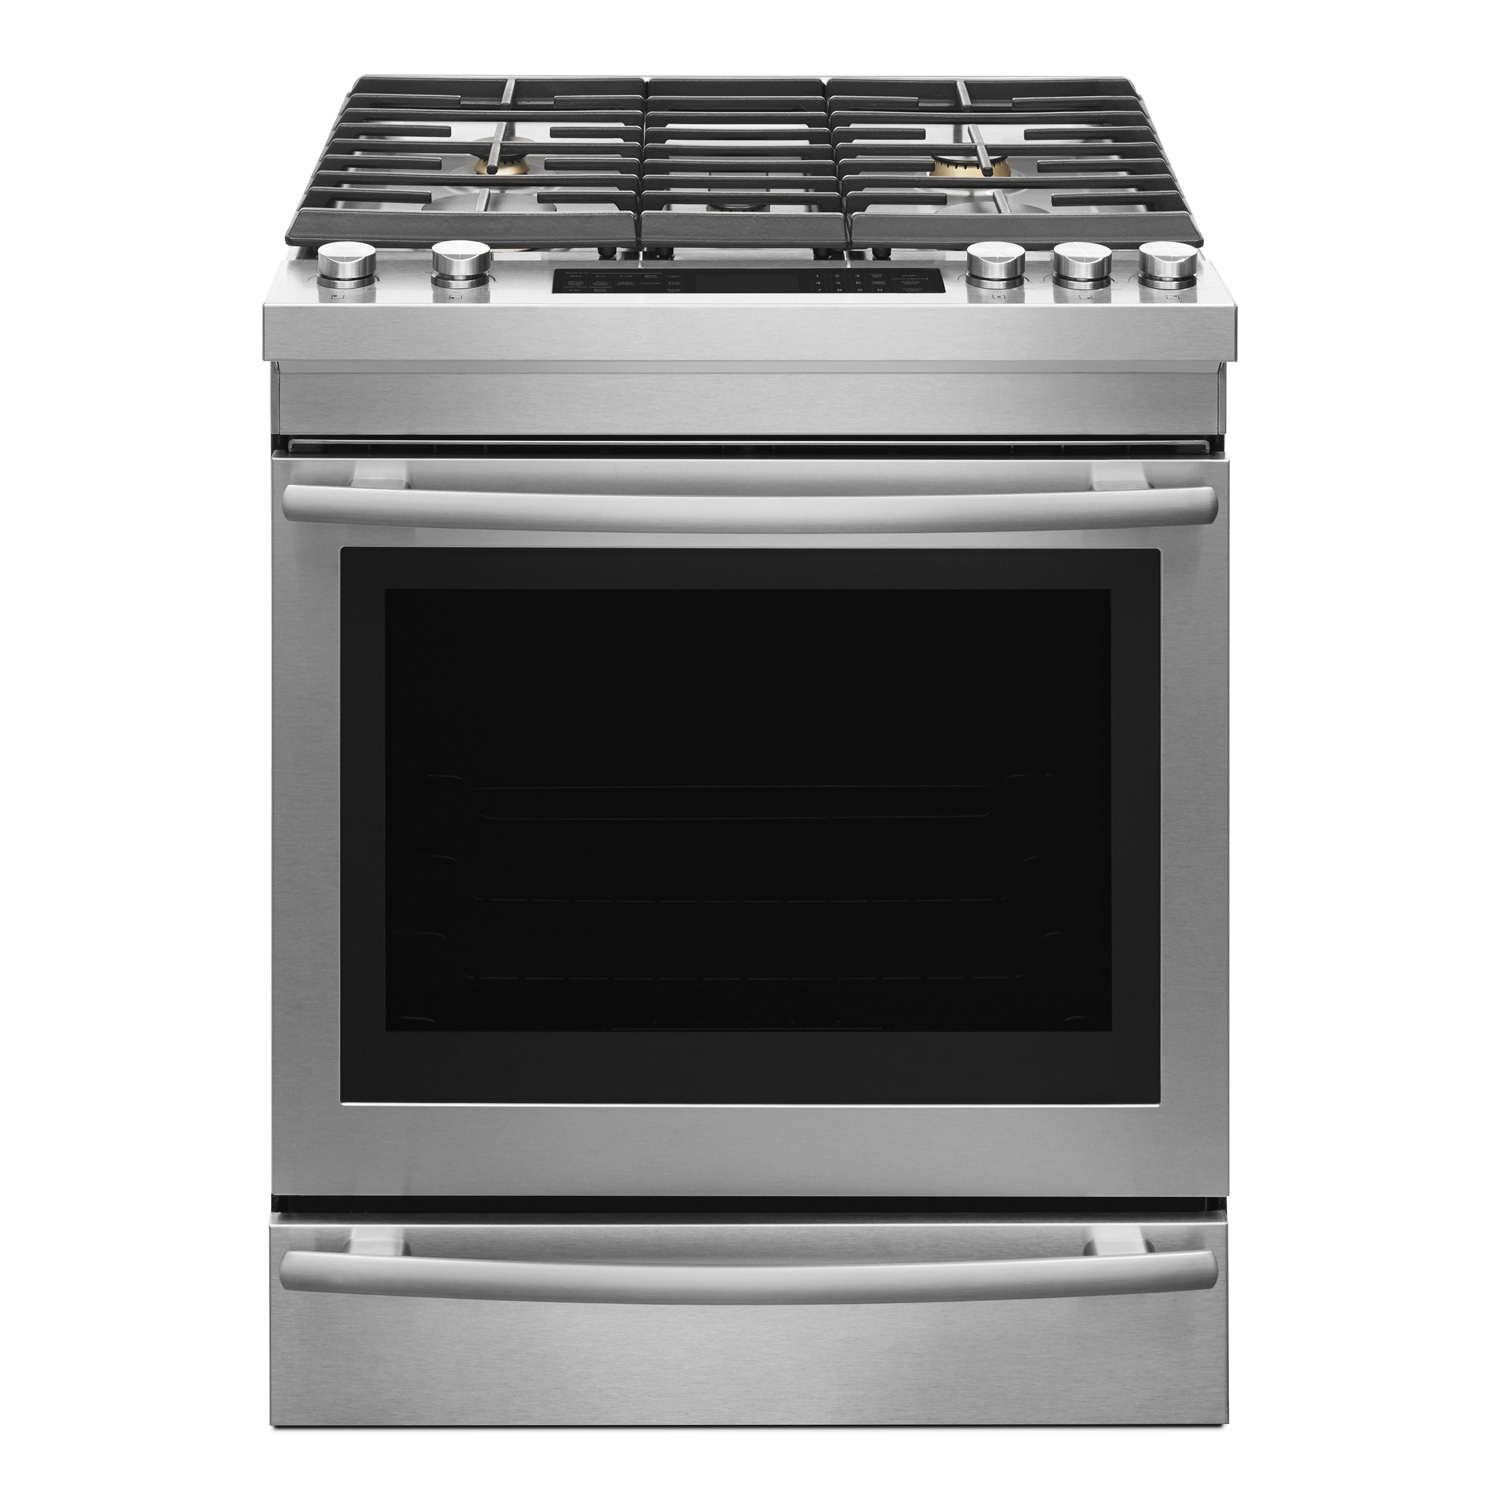 30 Inch Slide-in Gas Range Isolated on White. Front View of Stainless Steel Gas Stove with 5 Burners and Sealed Cooktop 5.8 Cu. Ft. Primary Oven Capacity. 